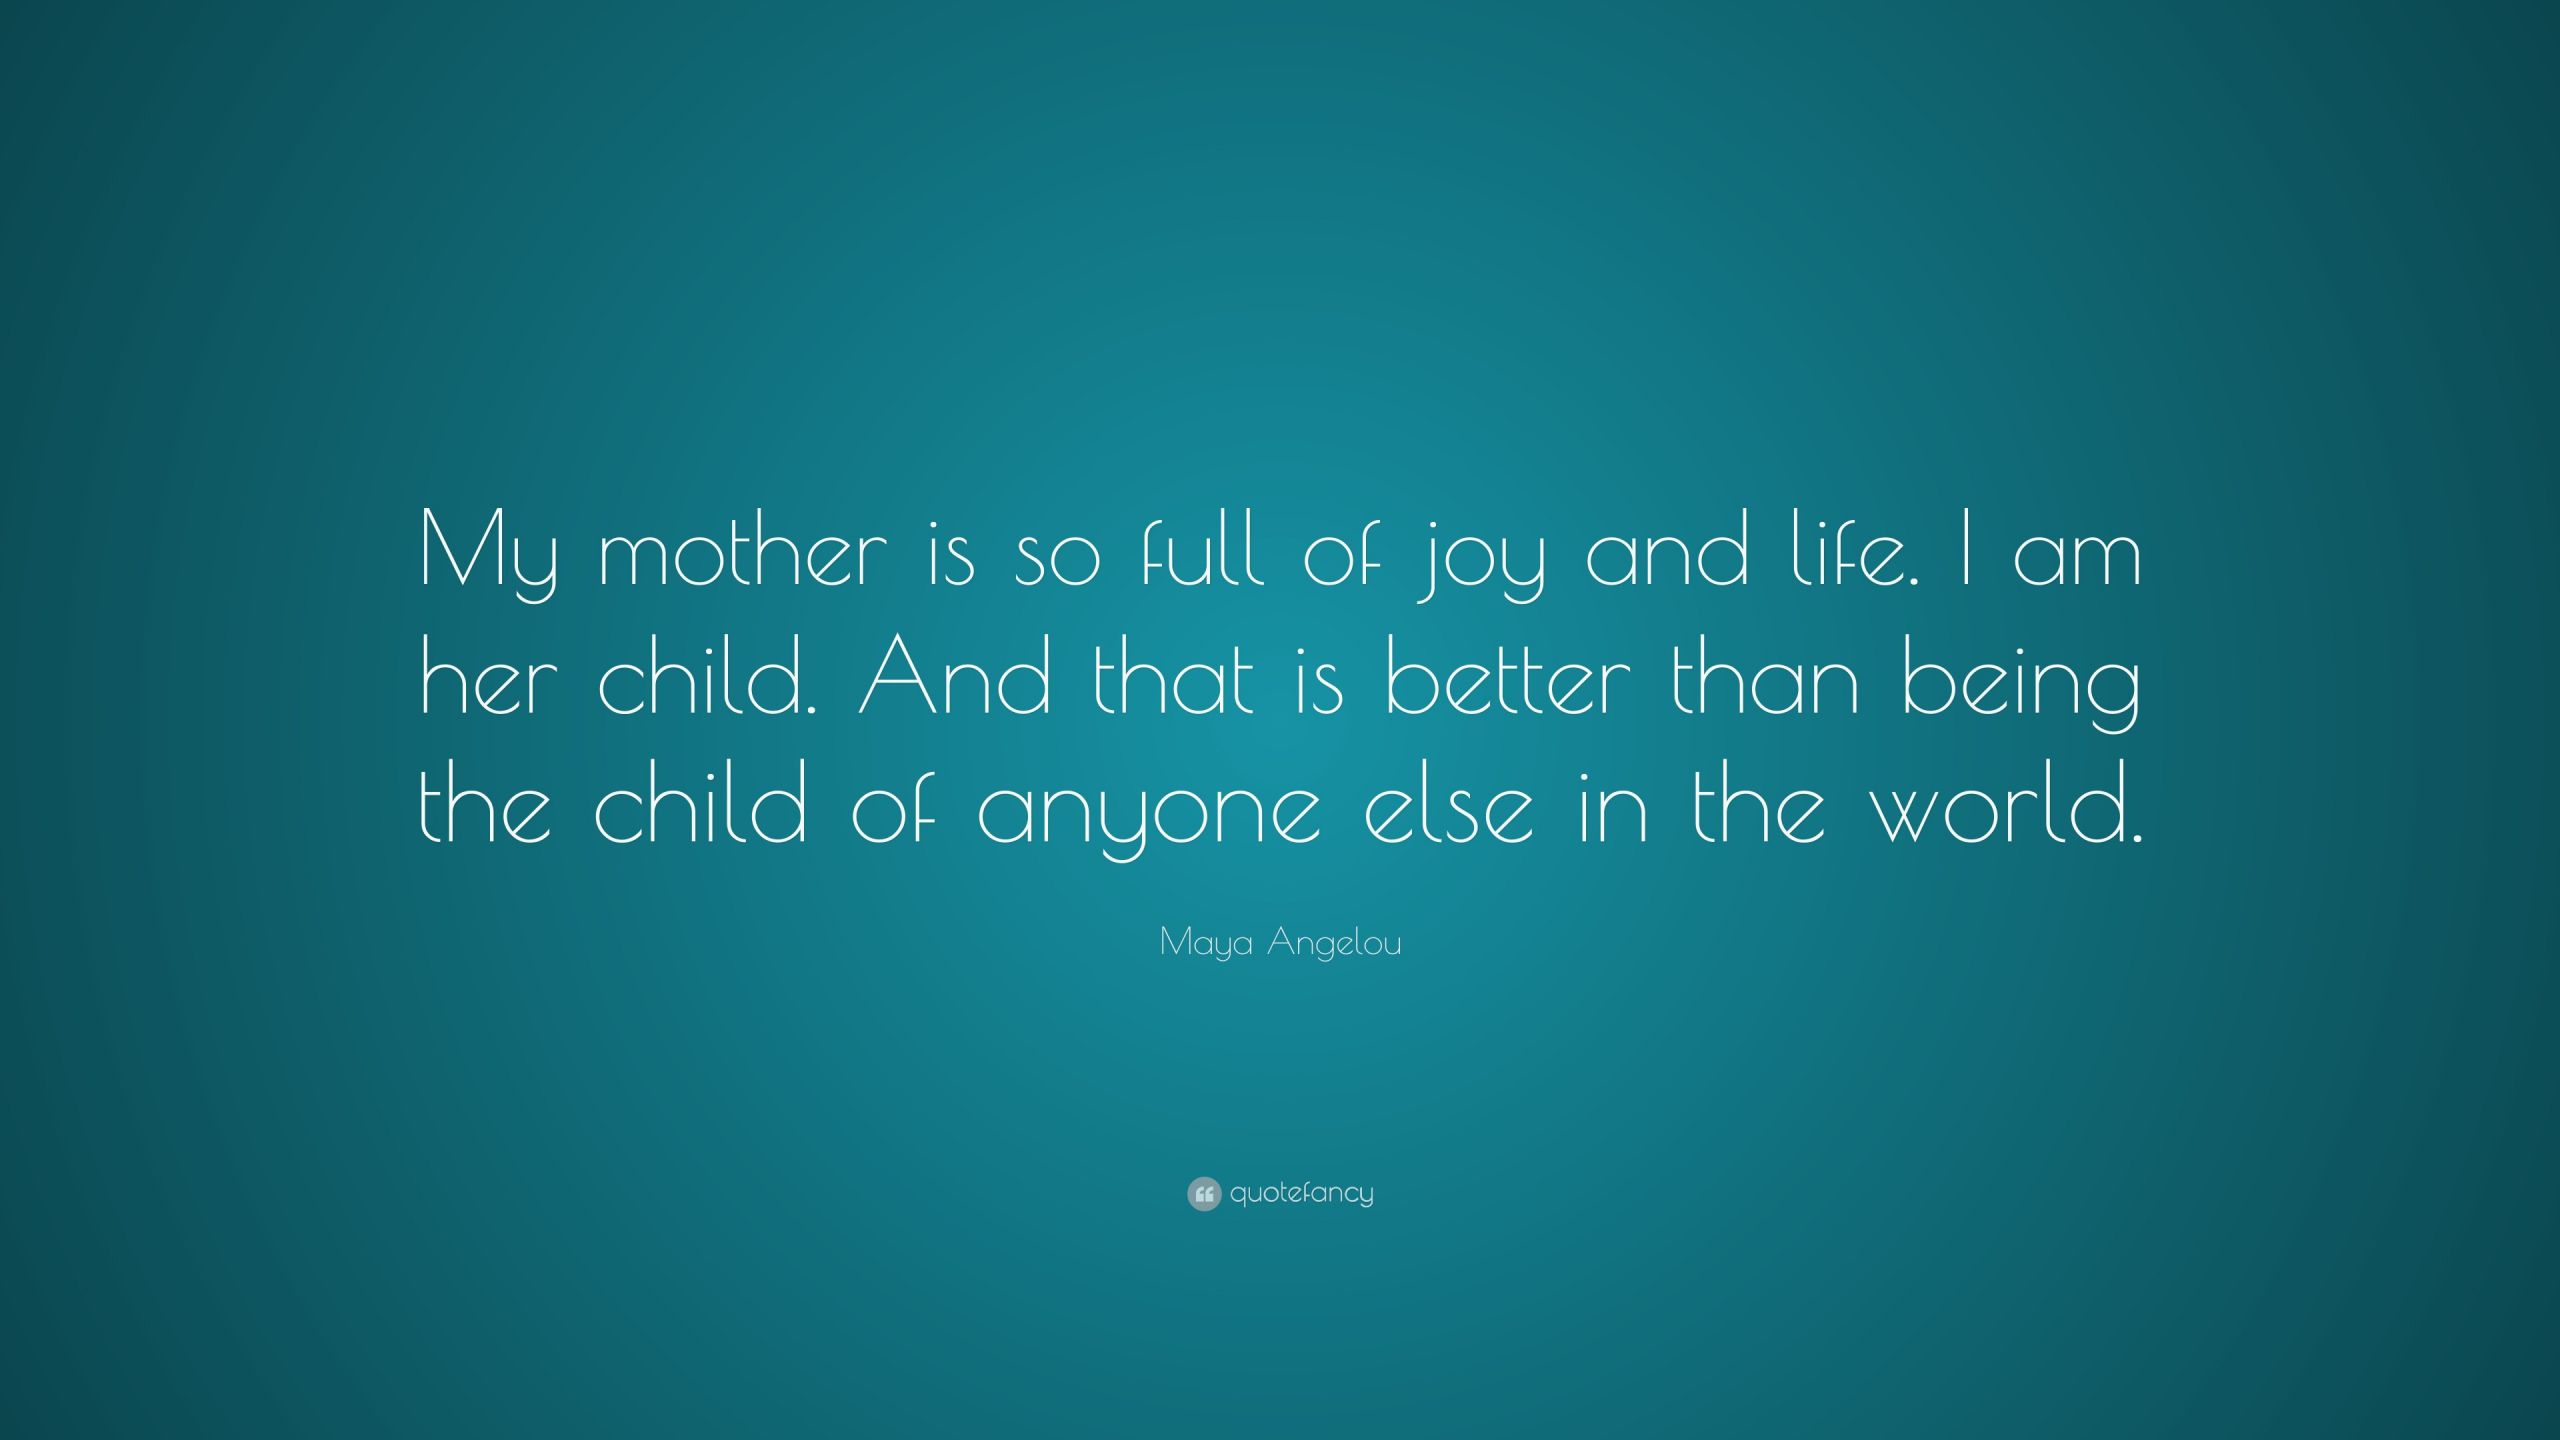 Maya Angelou Mother Quotes
 Maya Angelou Quote “My mother is so full of joy and life